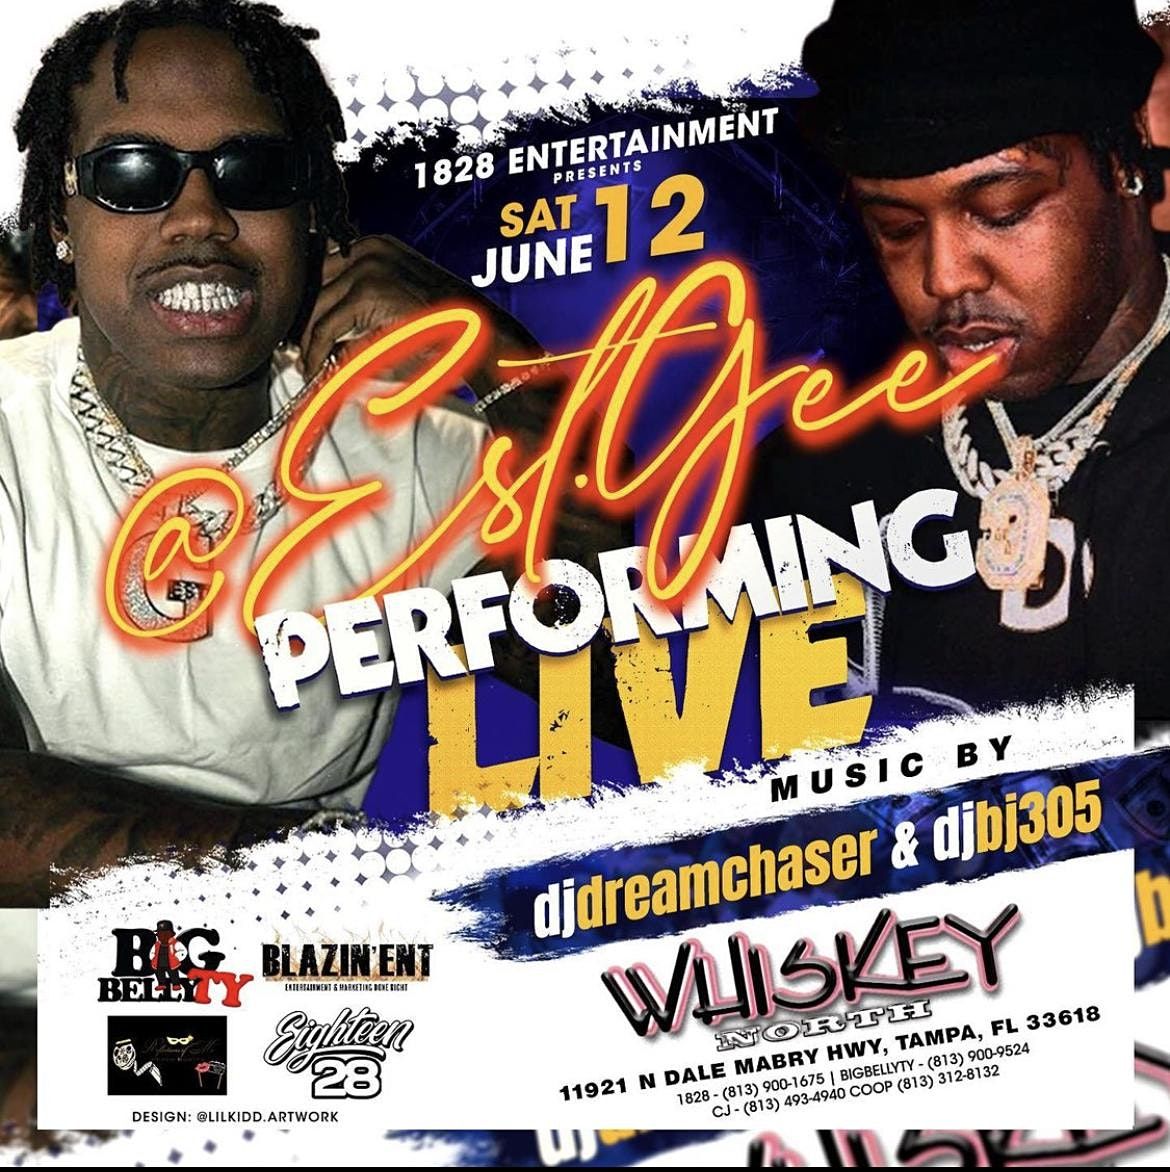 EST.GEE PERFORMING LIVE FOR THE 1st  time in Tampa @ Whiskey north